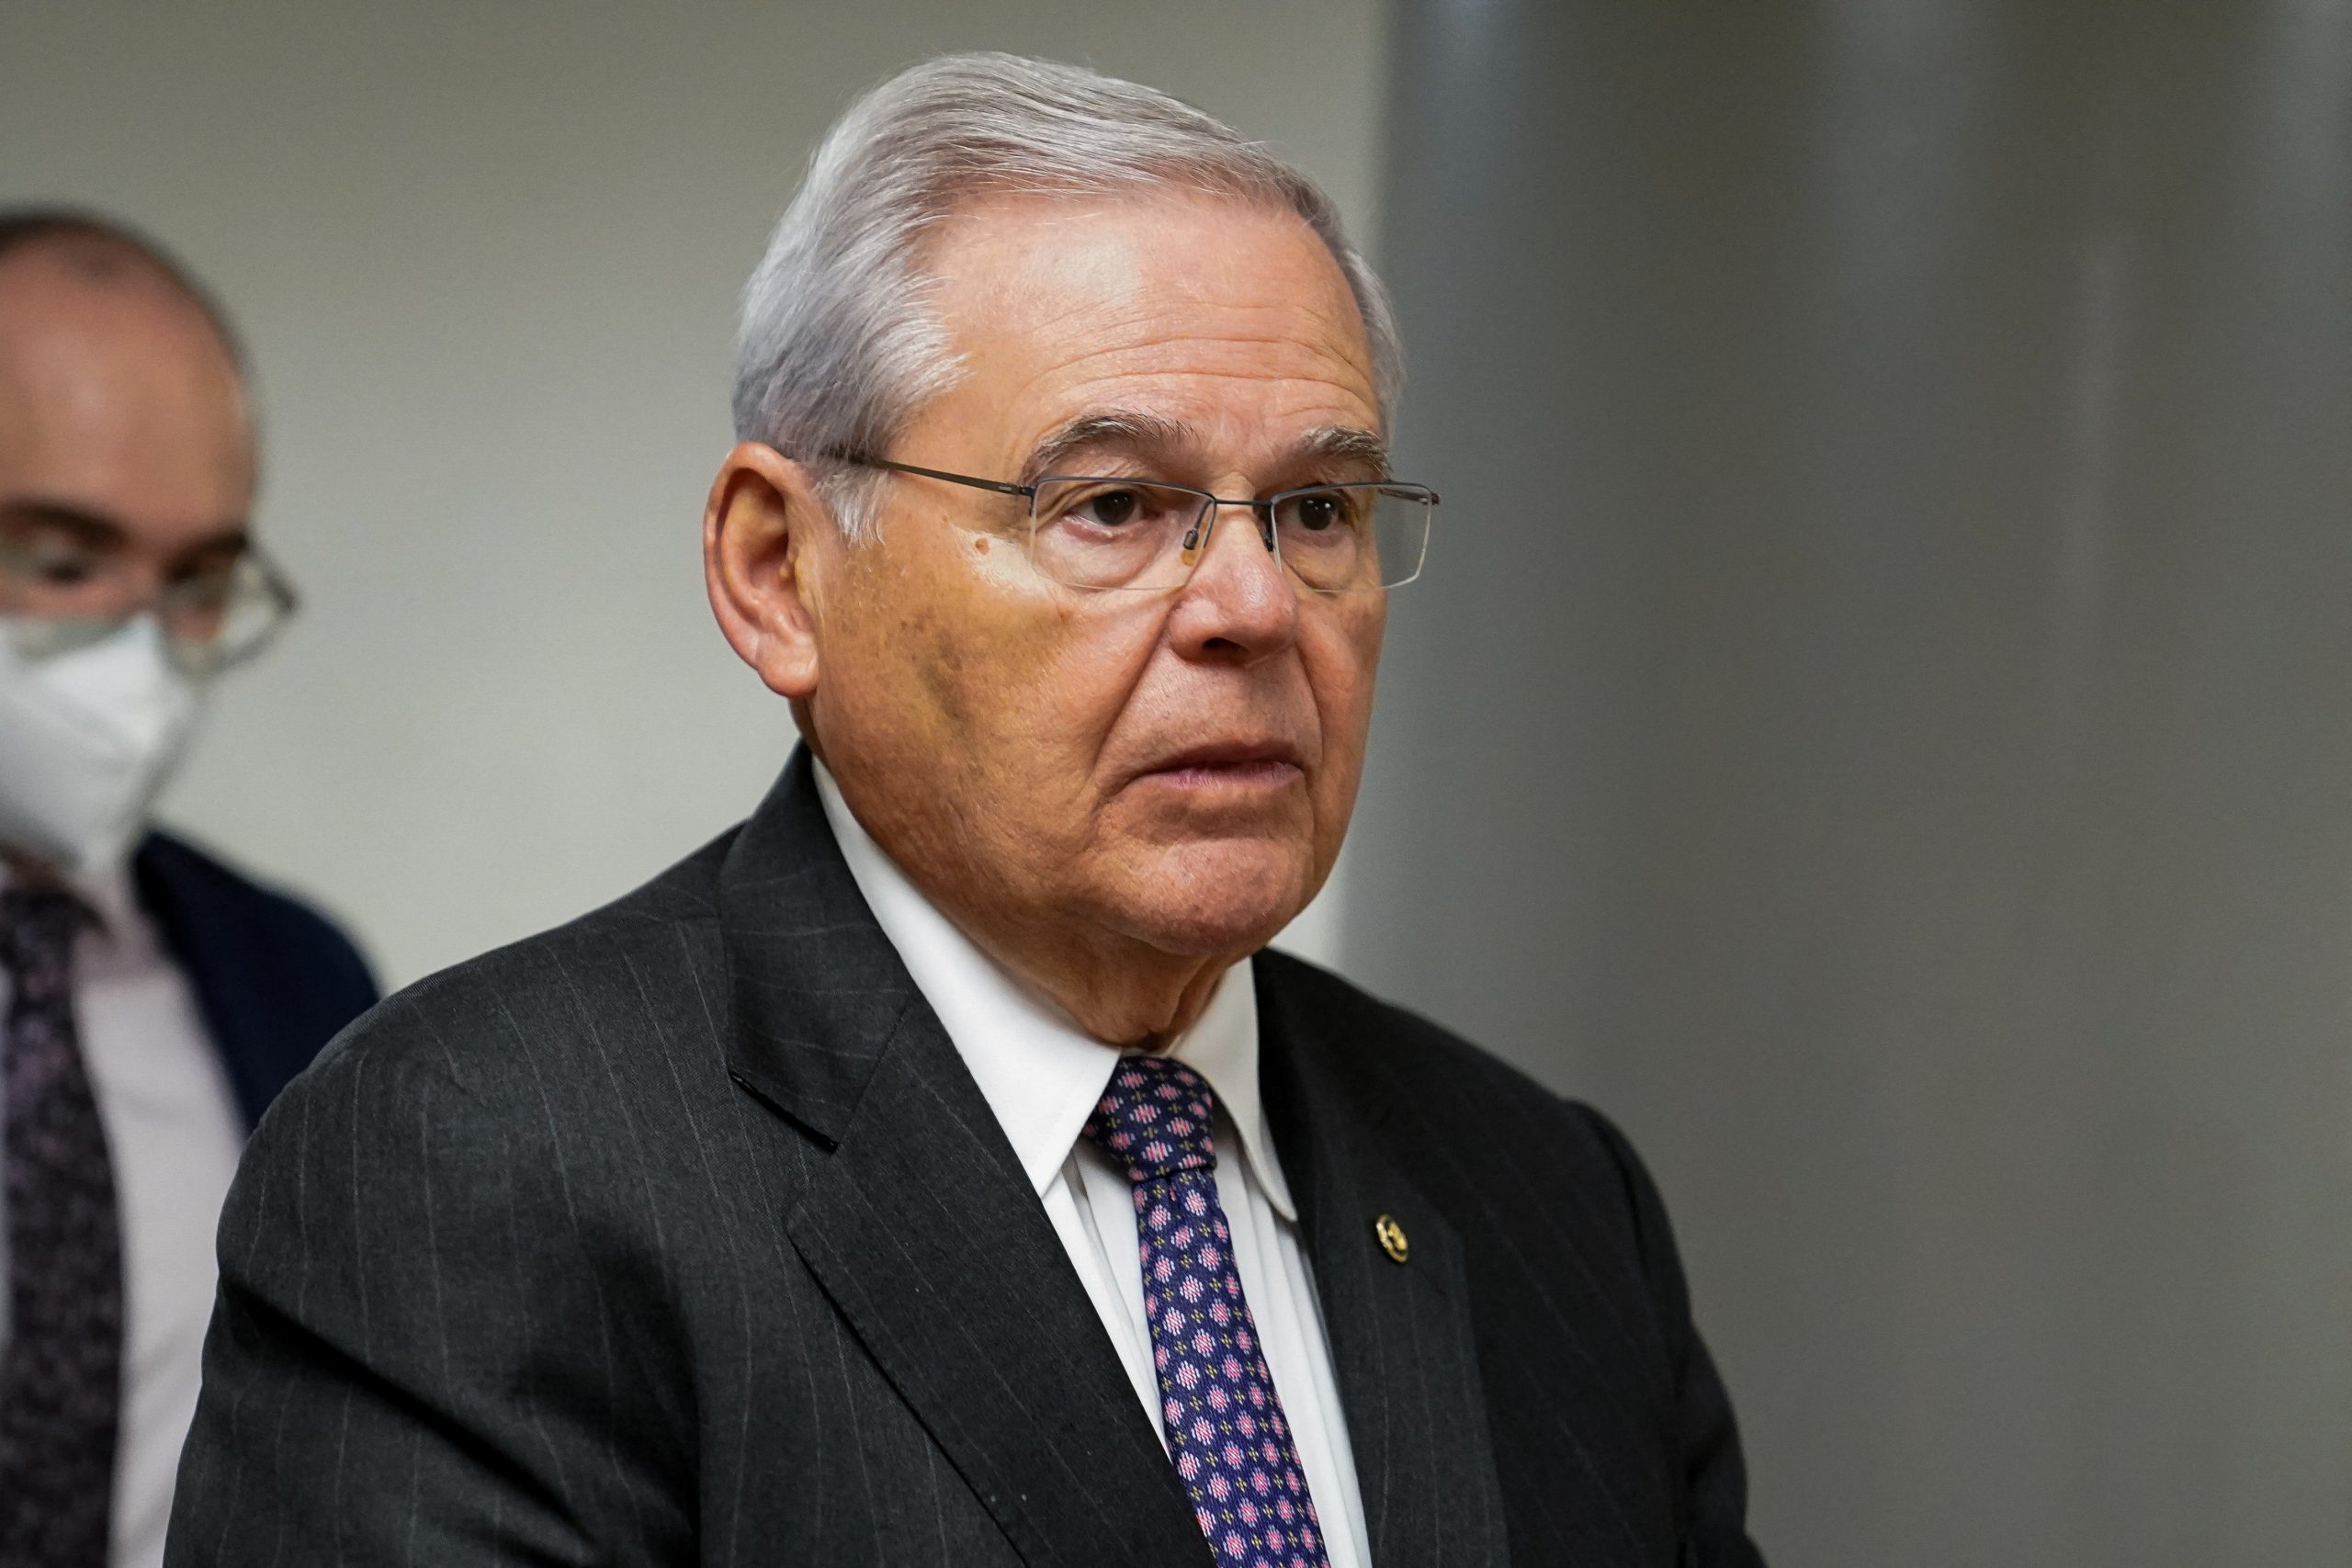 Bob Menendez faces new indictment for obstruction of justice